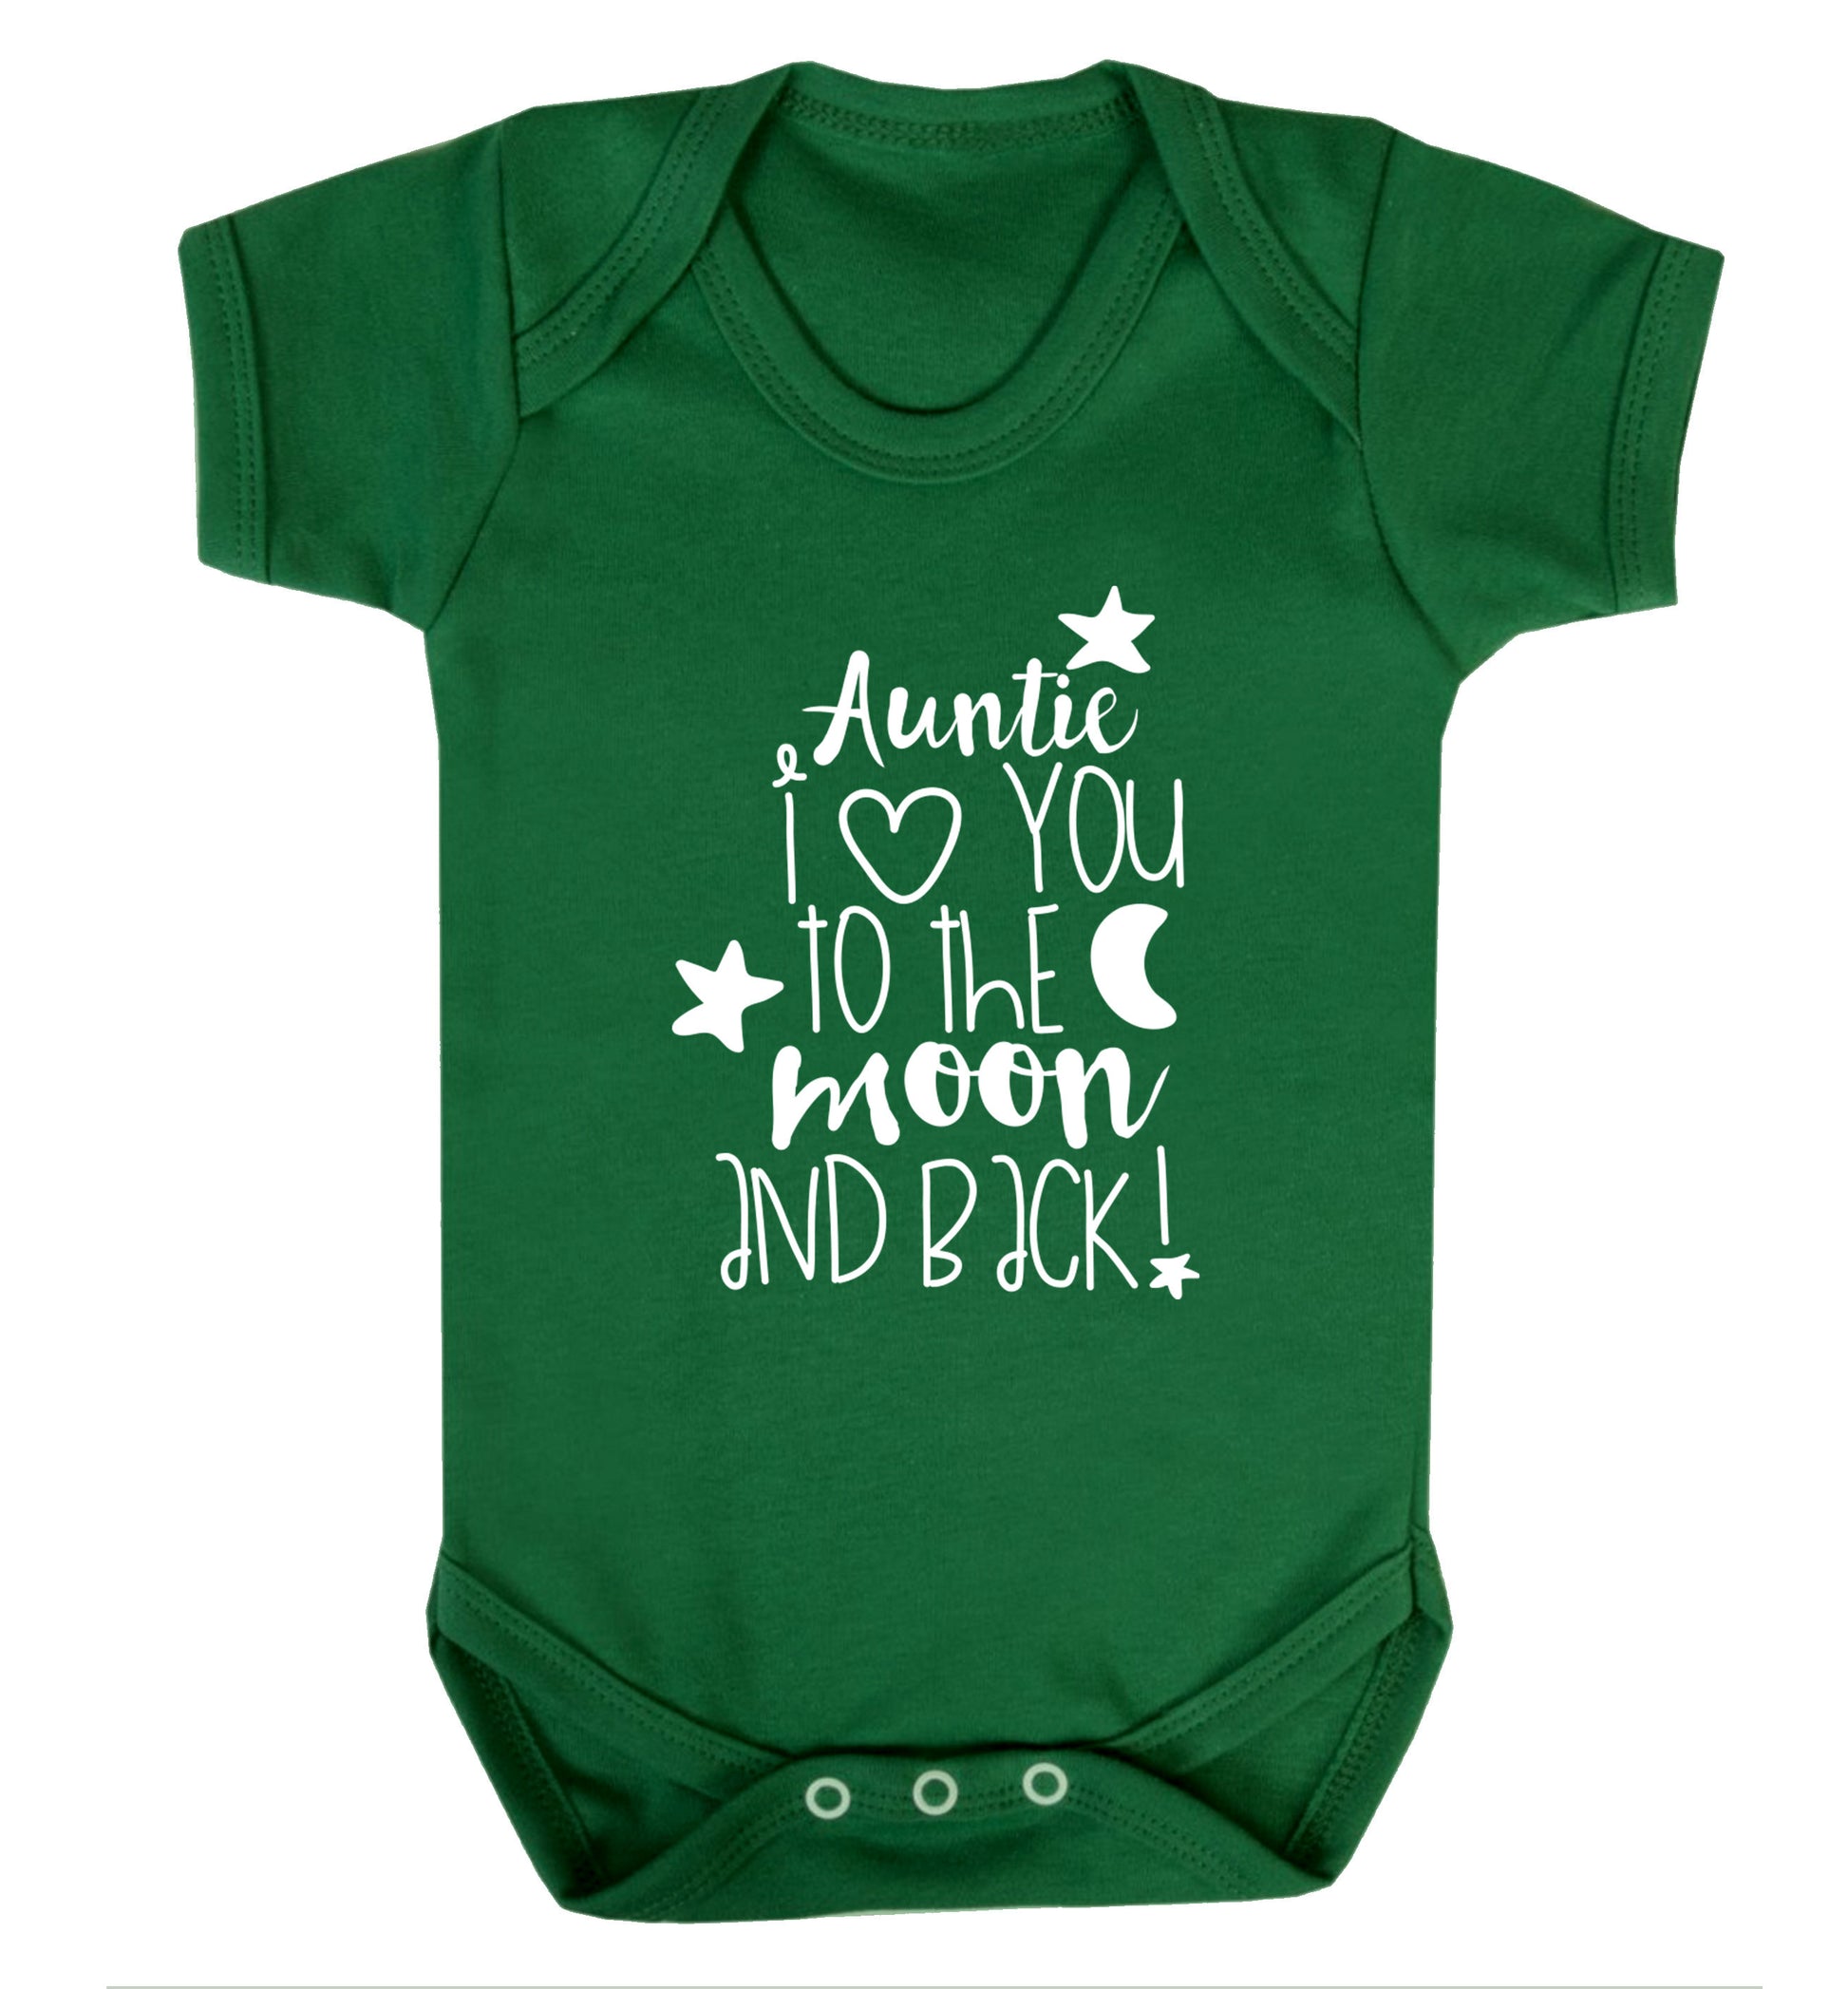 Auntie I love you to the moon and back Baby Vest green 18-24 months